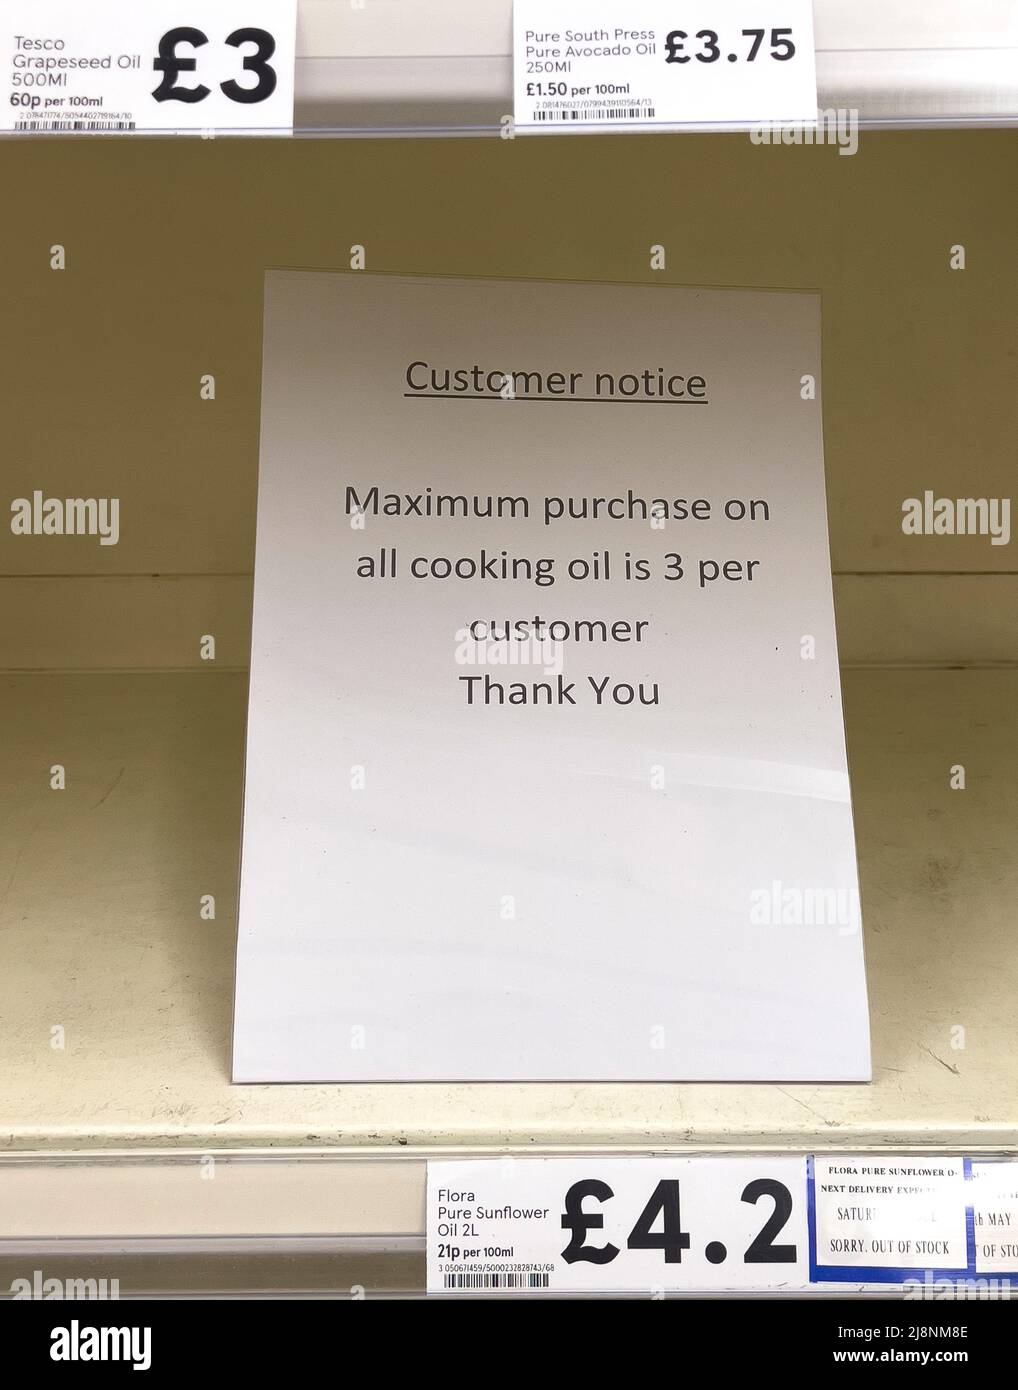 17/05/2022 Empty shelves of cooking oil at a Tesco in London today  Global supply shortages and soaring costs have pushed supermarkets i Stock Photo